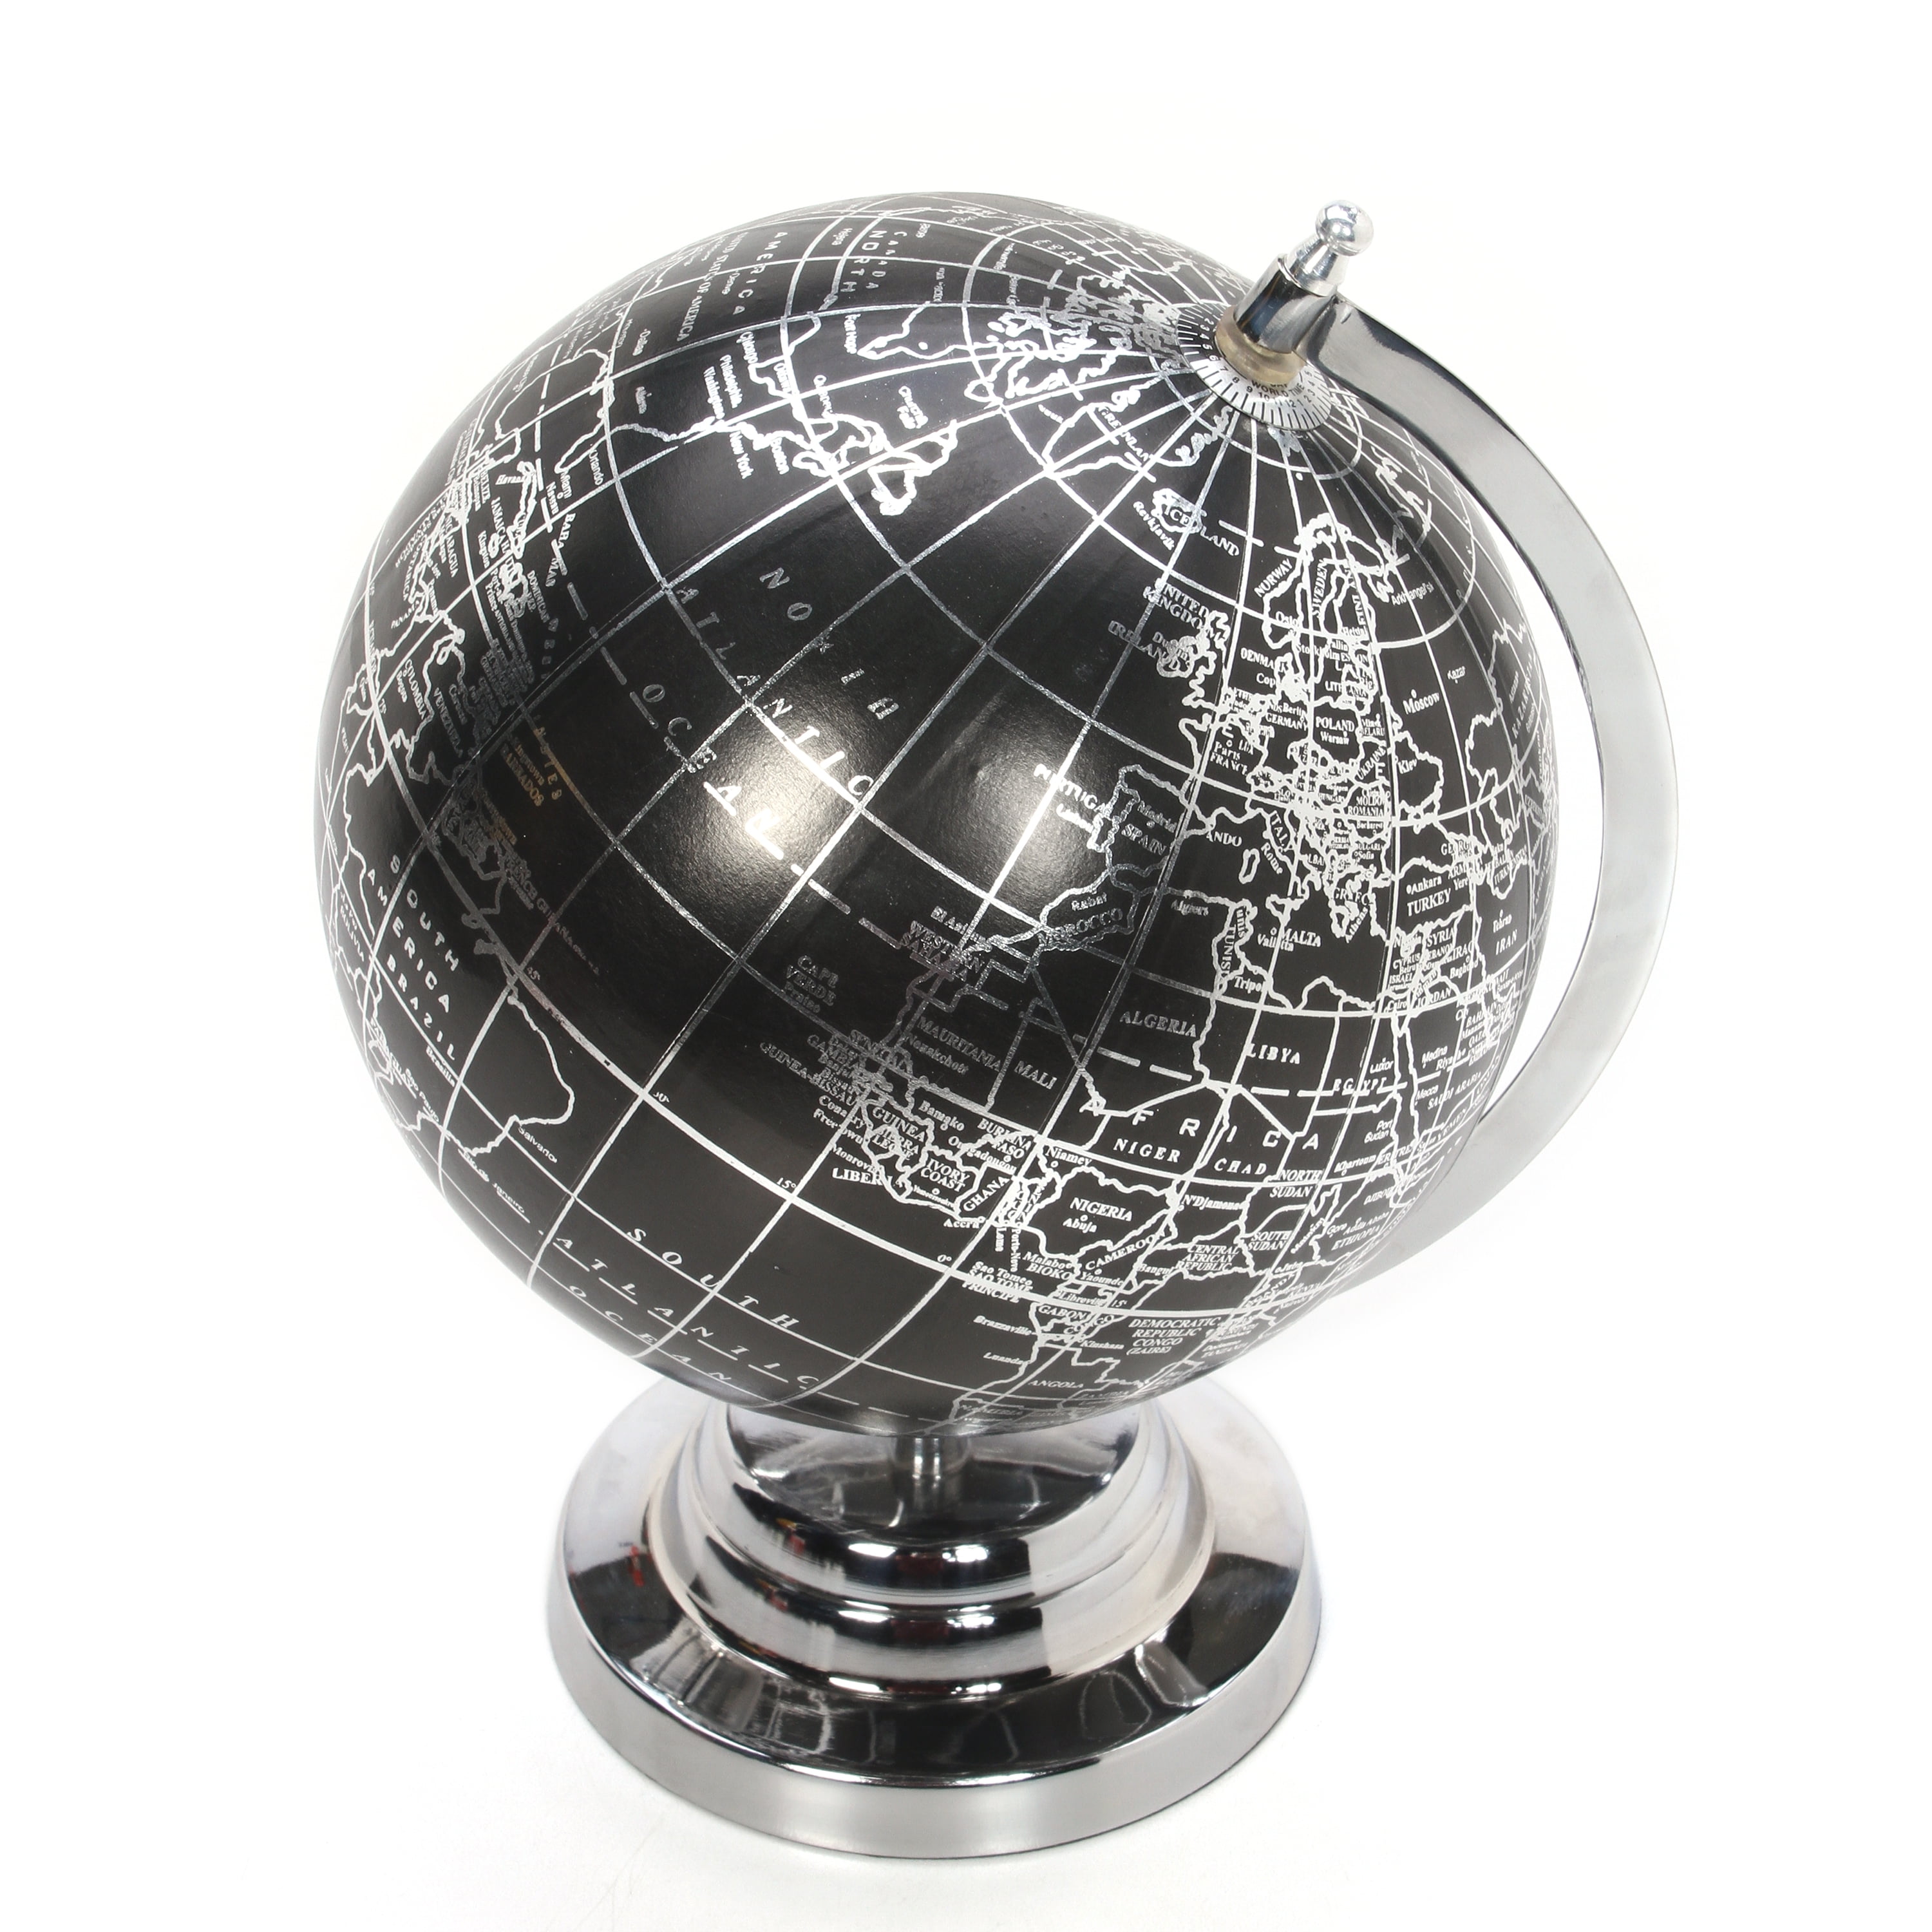  ANNOVA Metallic World Globe Black –  Educational/Geographic/Modern Desktop Decoration - Stainless Steel Arc and  Base/Earth World - Metallic Black - for School, Home, and Office (10-Inch)  : Toys & Games